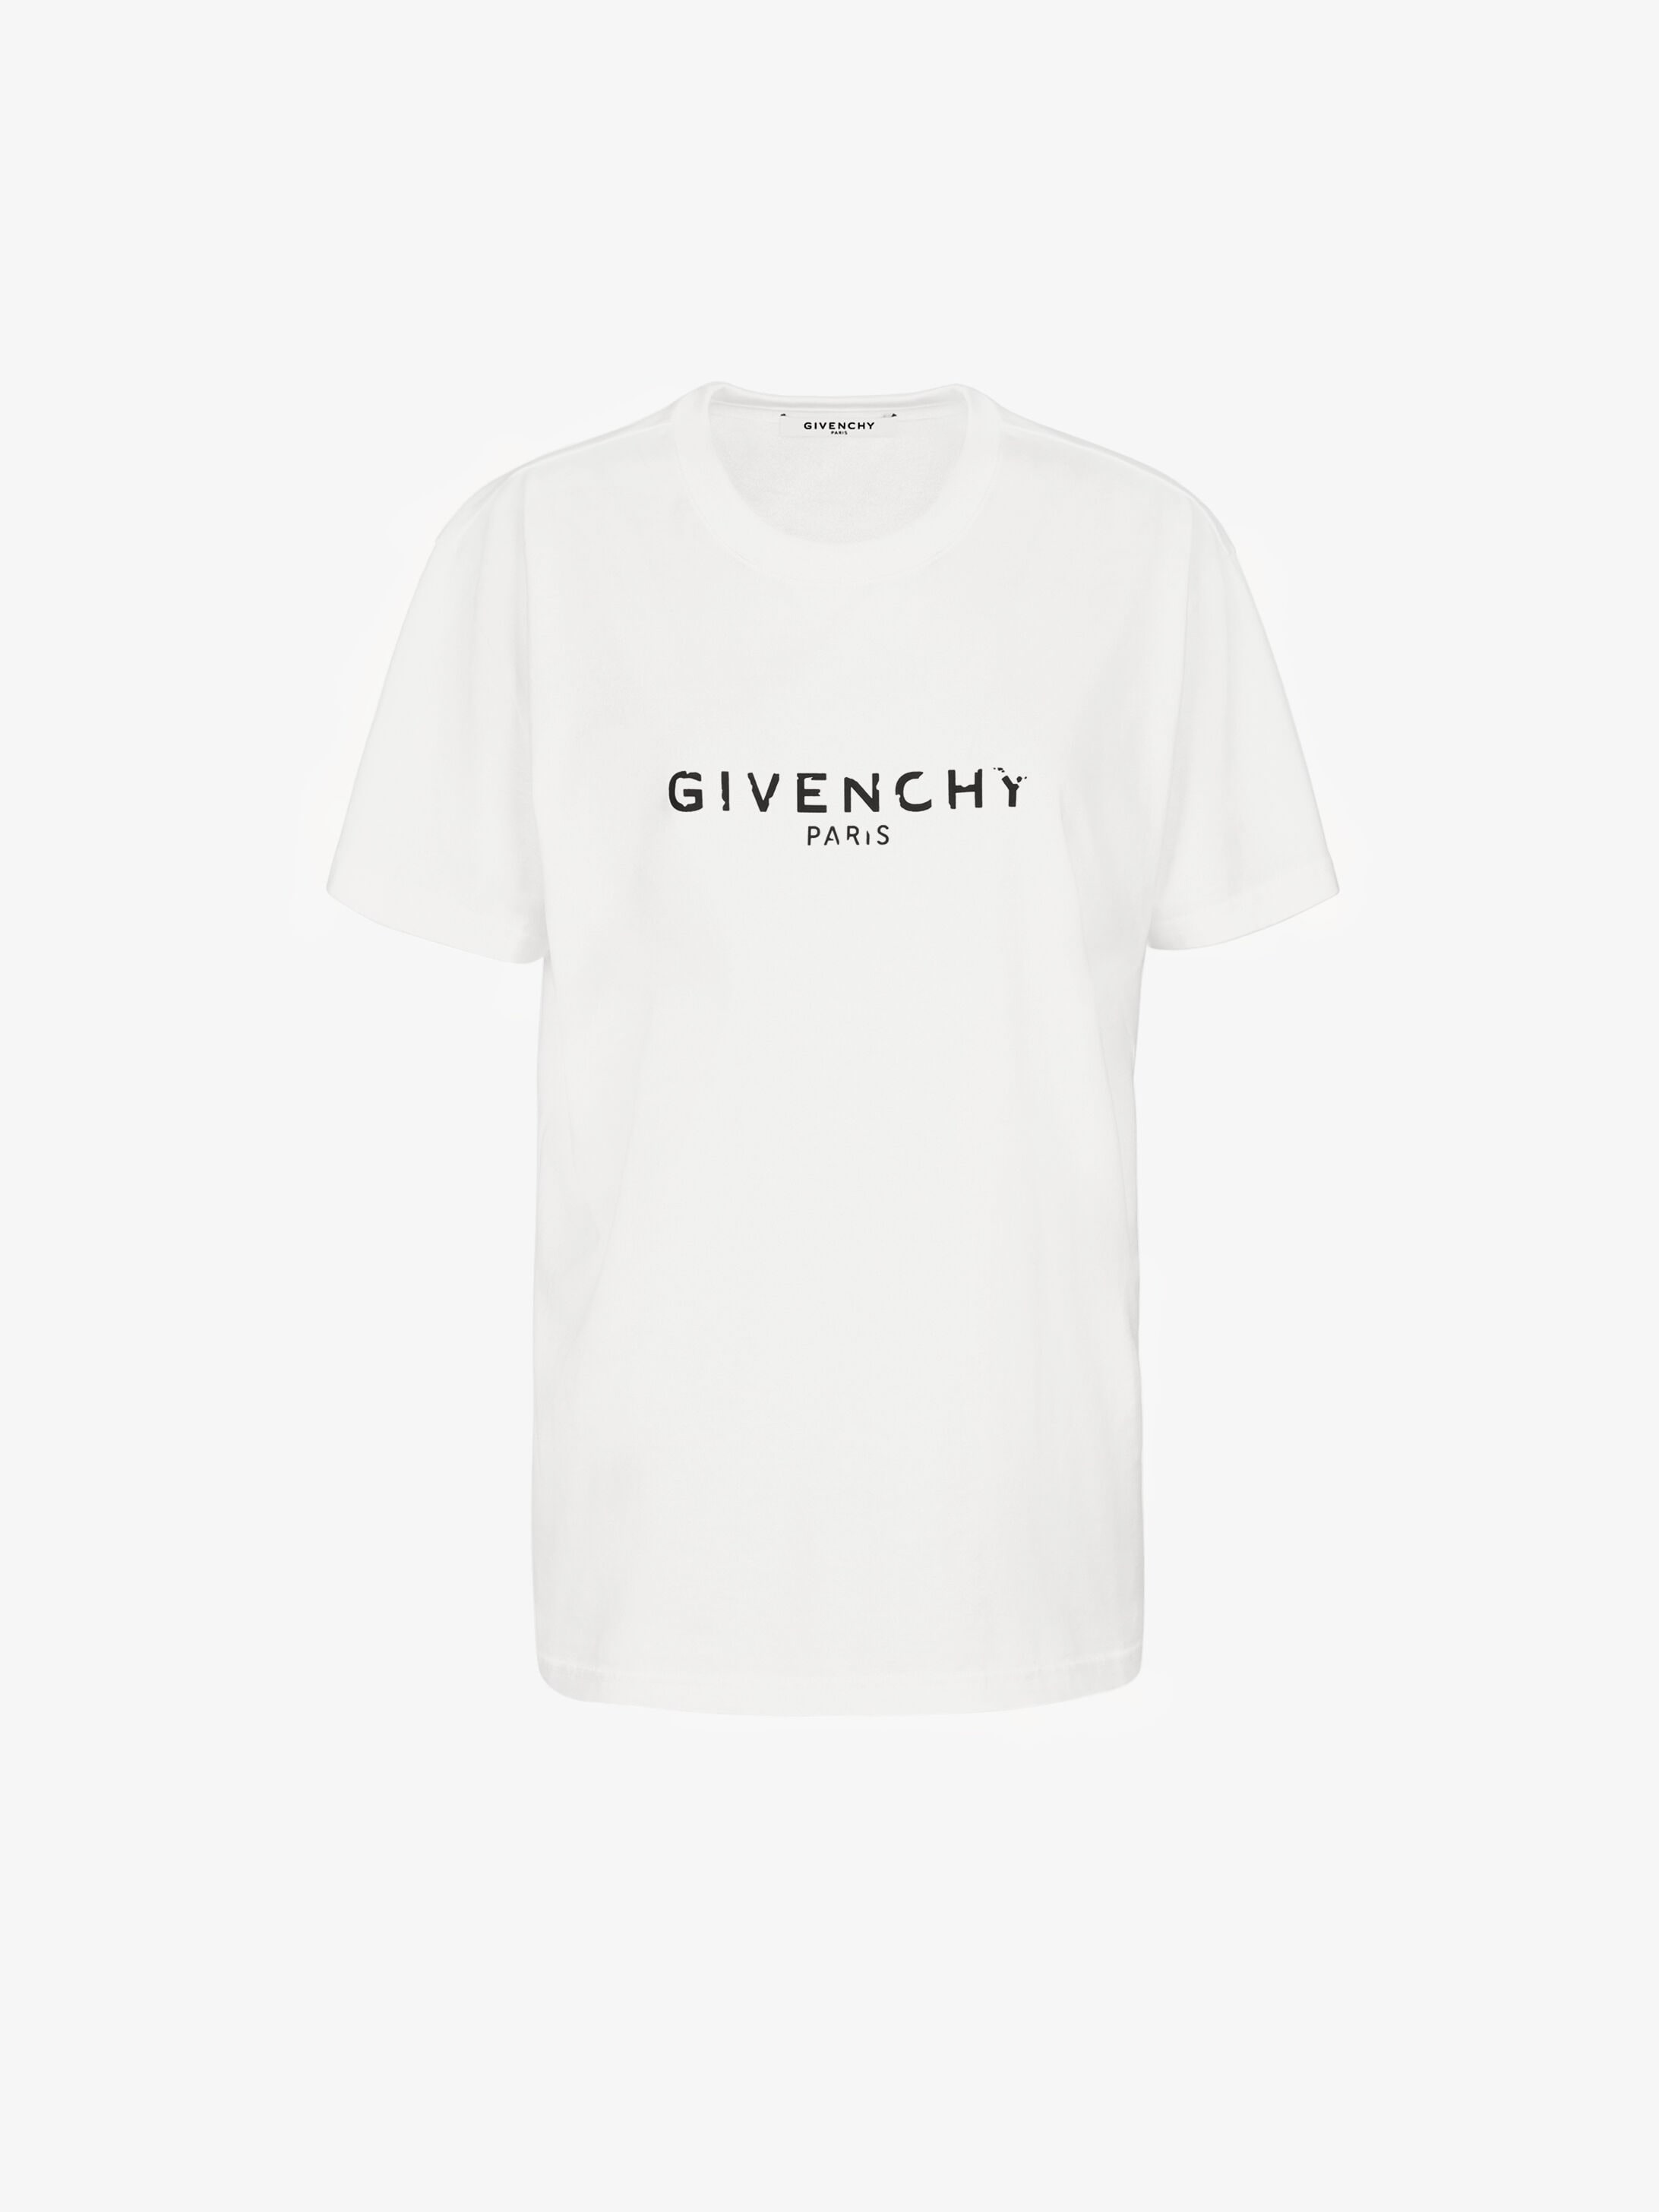 givenchy clothes price